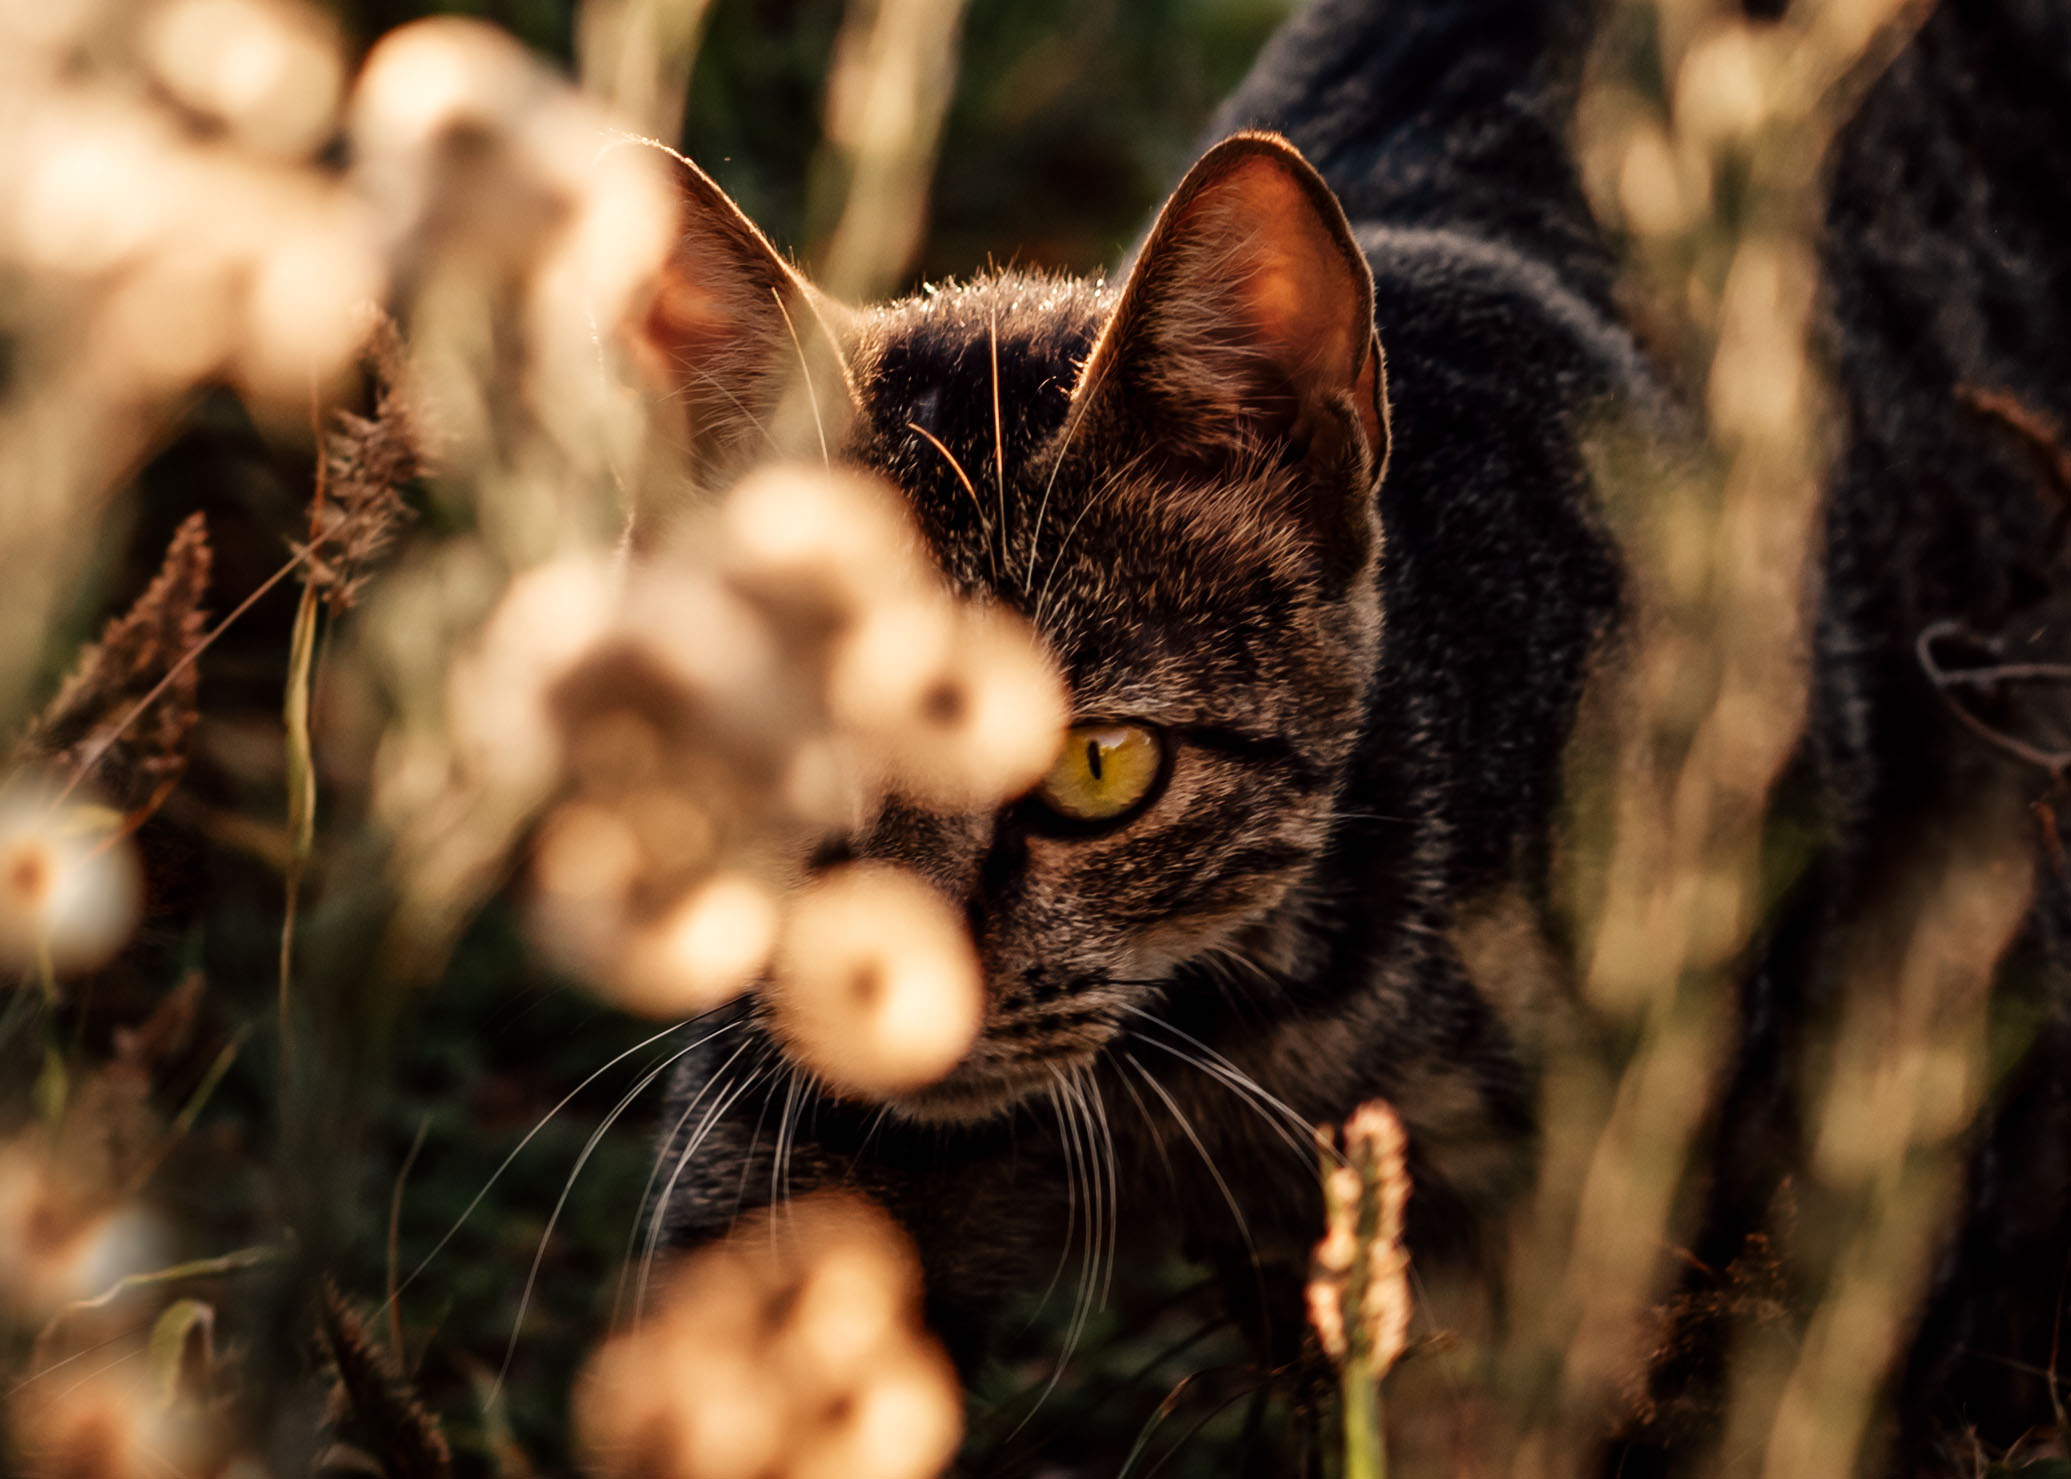 Why Back Button Focus (BBF) is my BFF - Cat in the grass